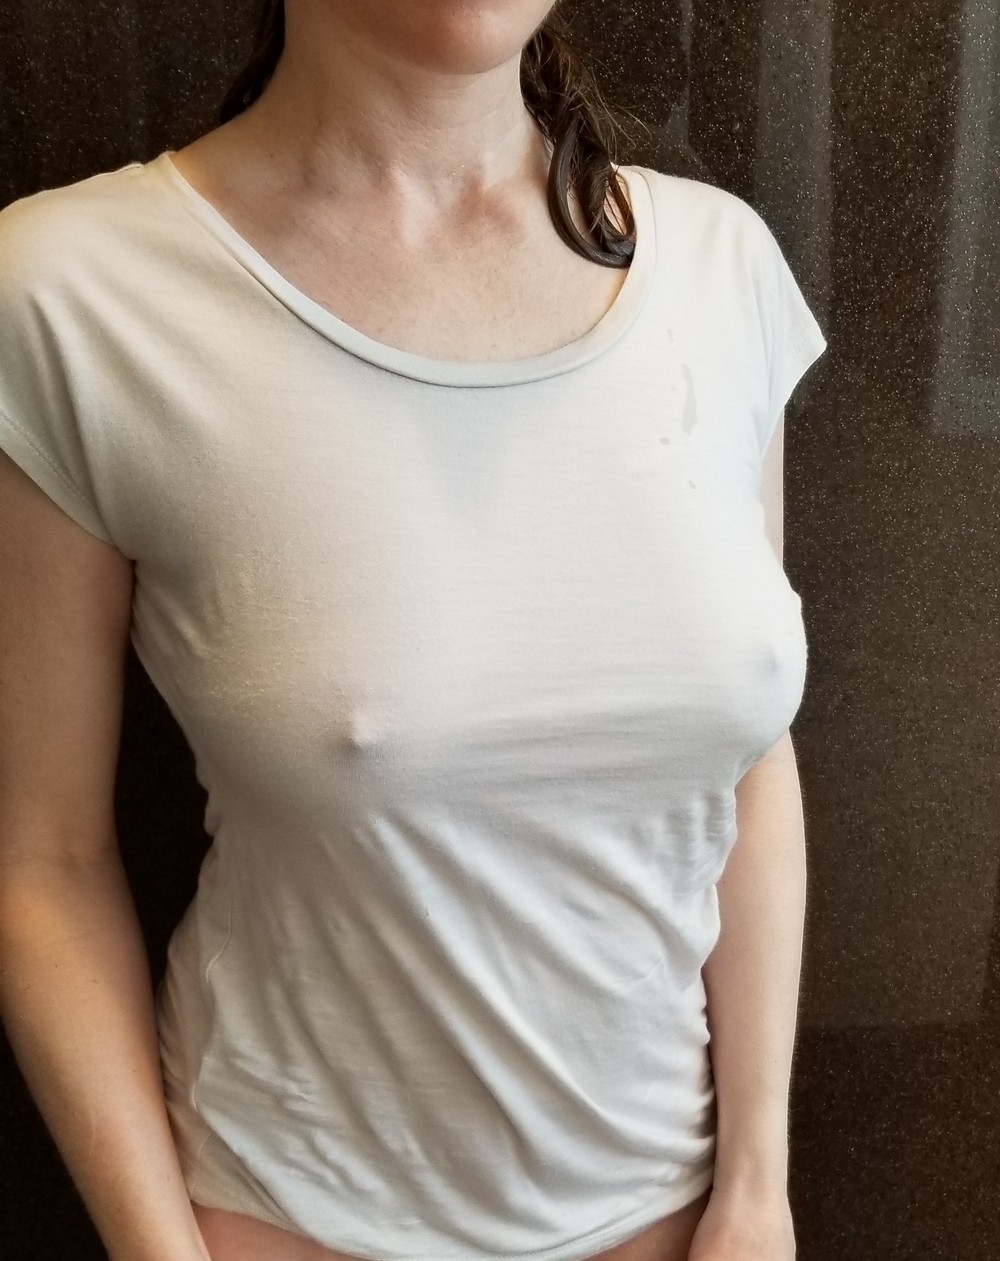 Milky Breasts Of Bbw Mature Woman